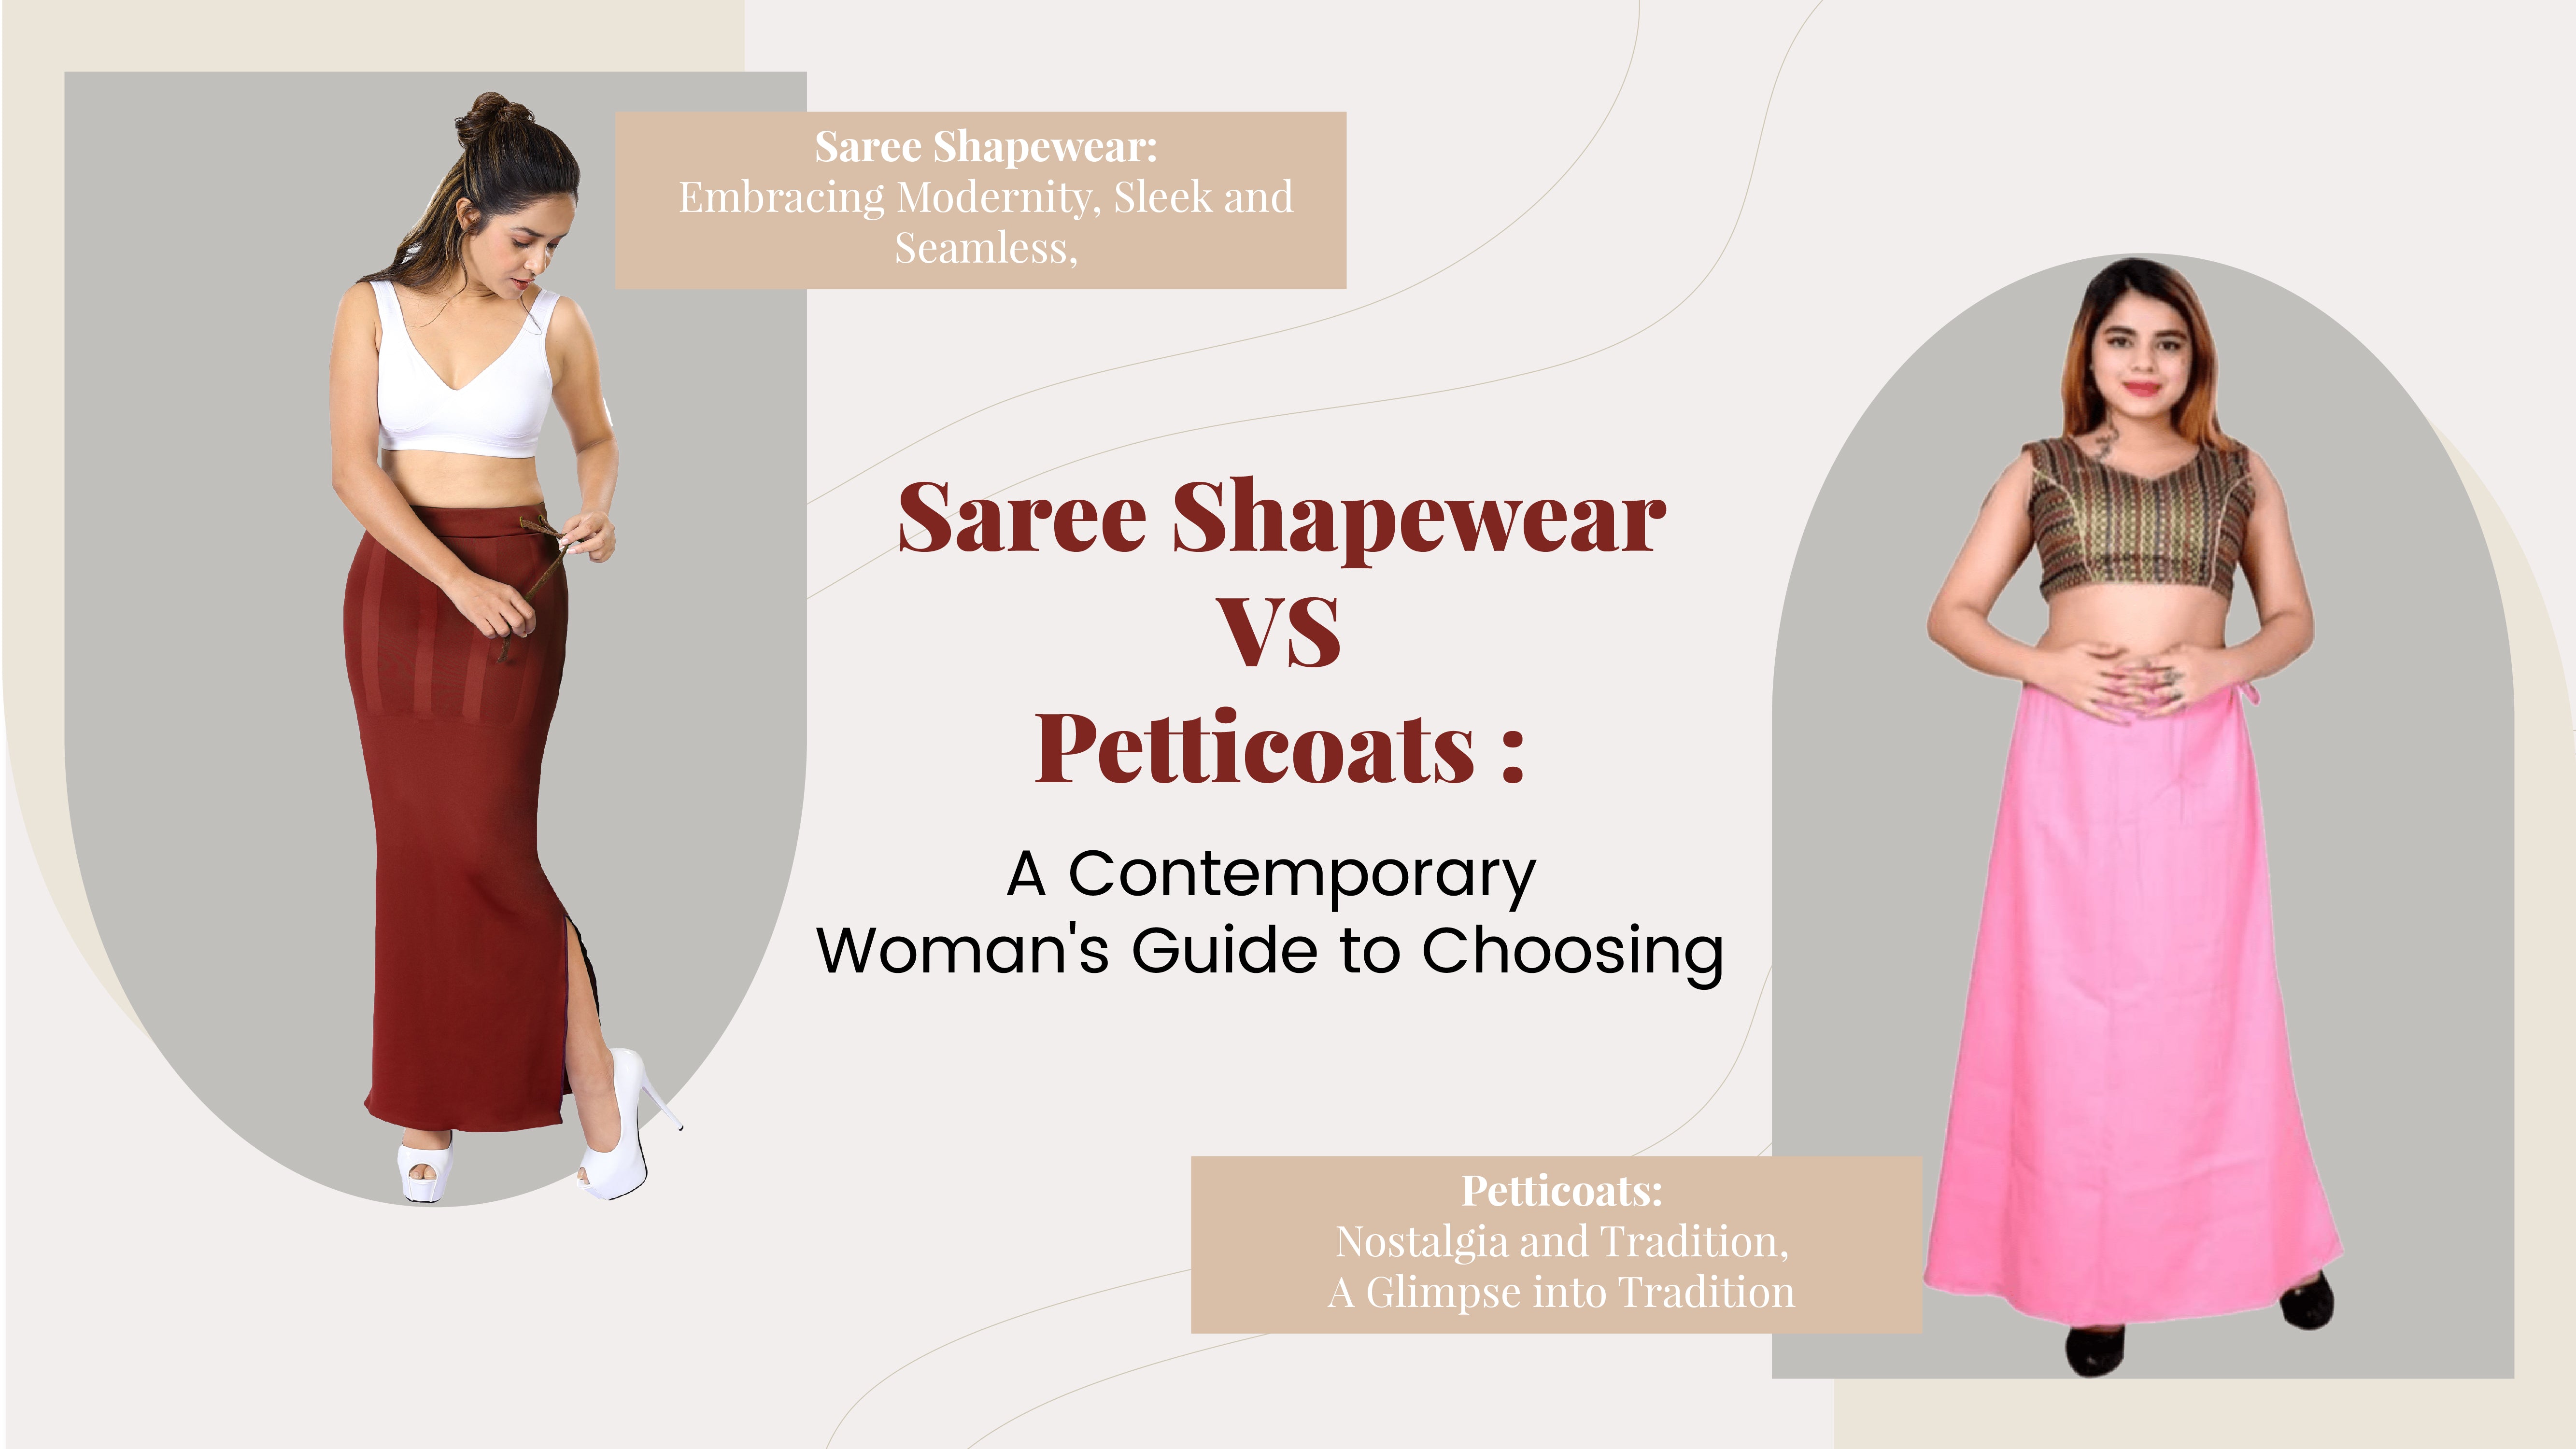 Petticoat or Saree shapewear, which one is better? We'll both of them have  their pros and cons but I would anyway prefer a petticoat if